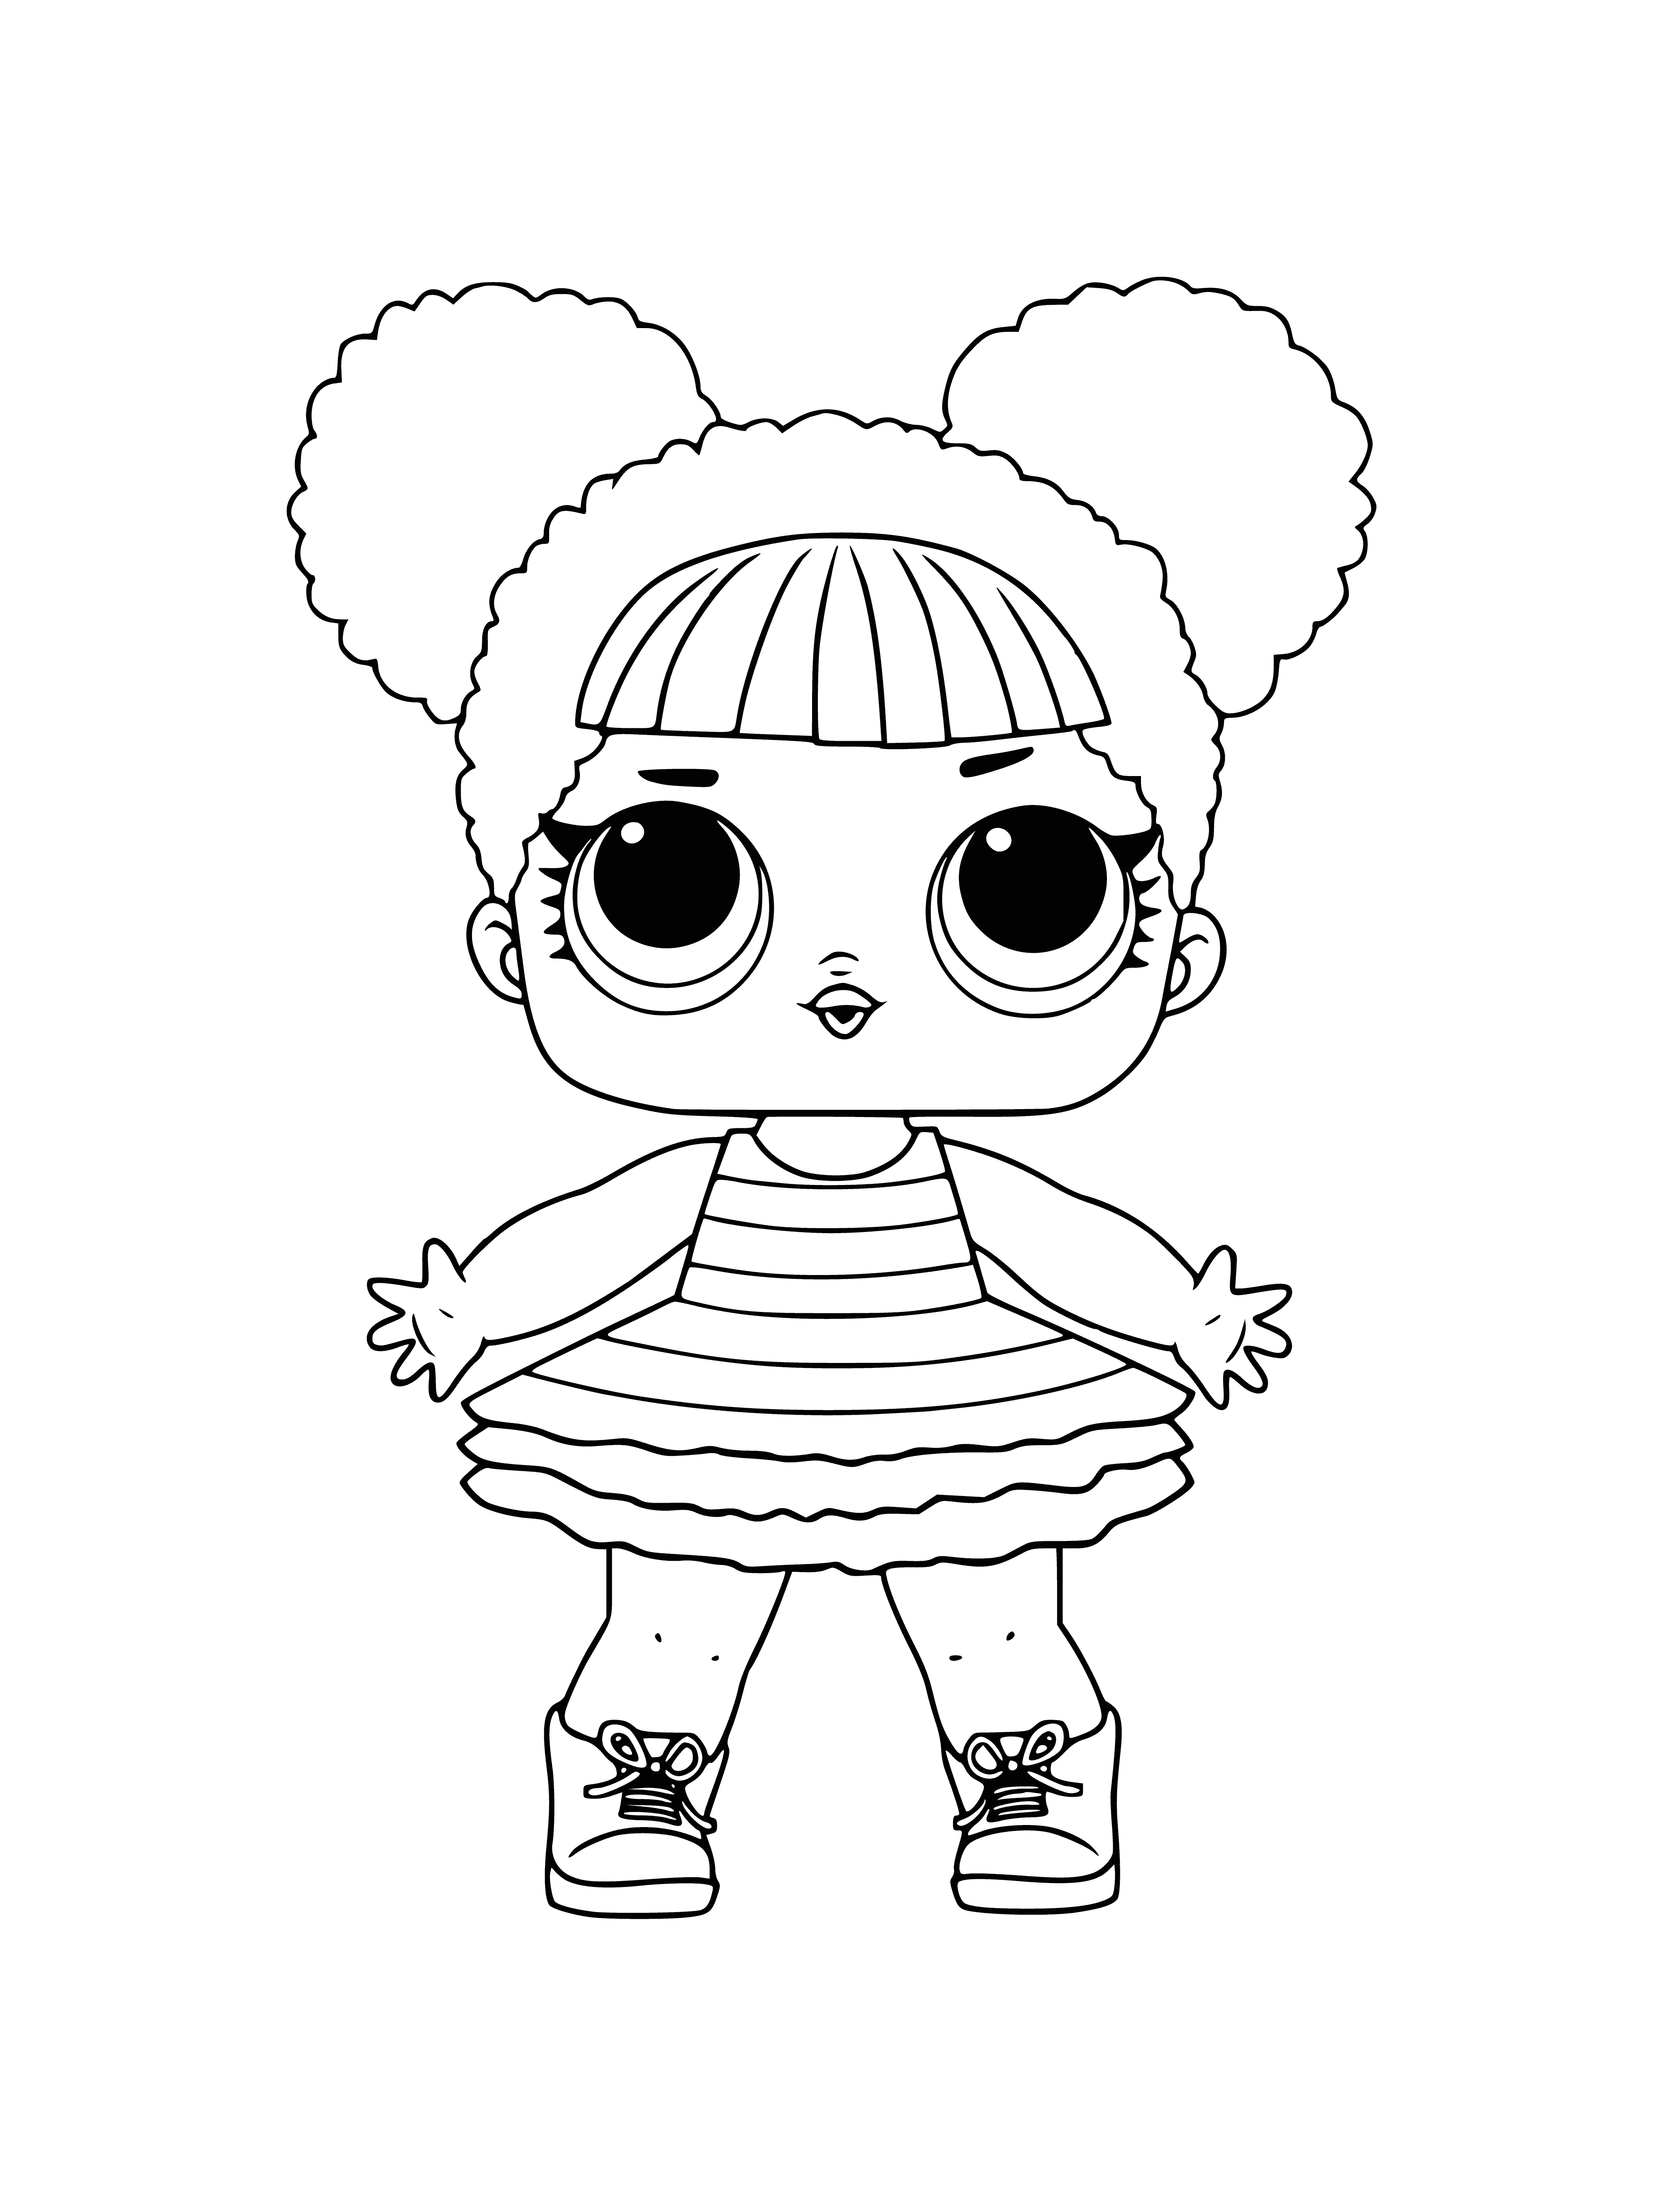 LOL Queen Bee episode 1 coloring page